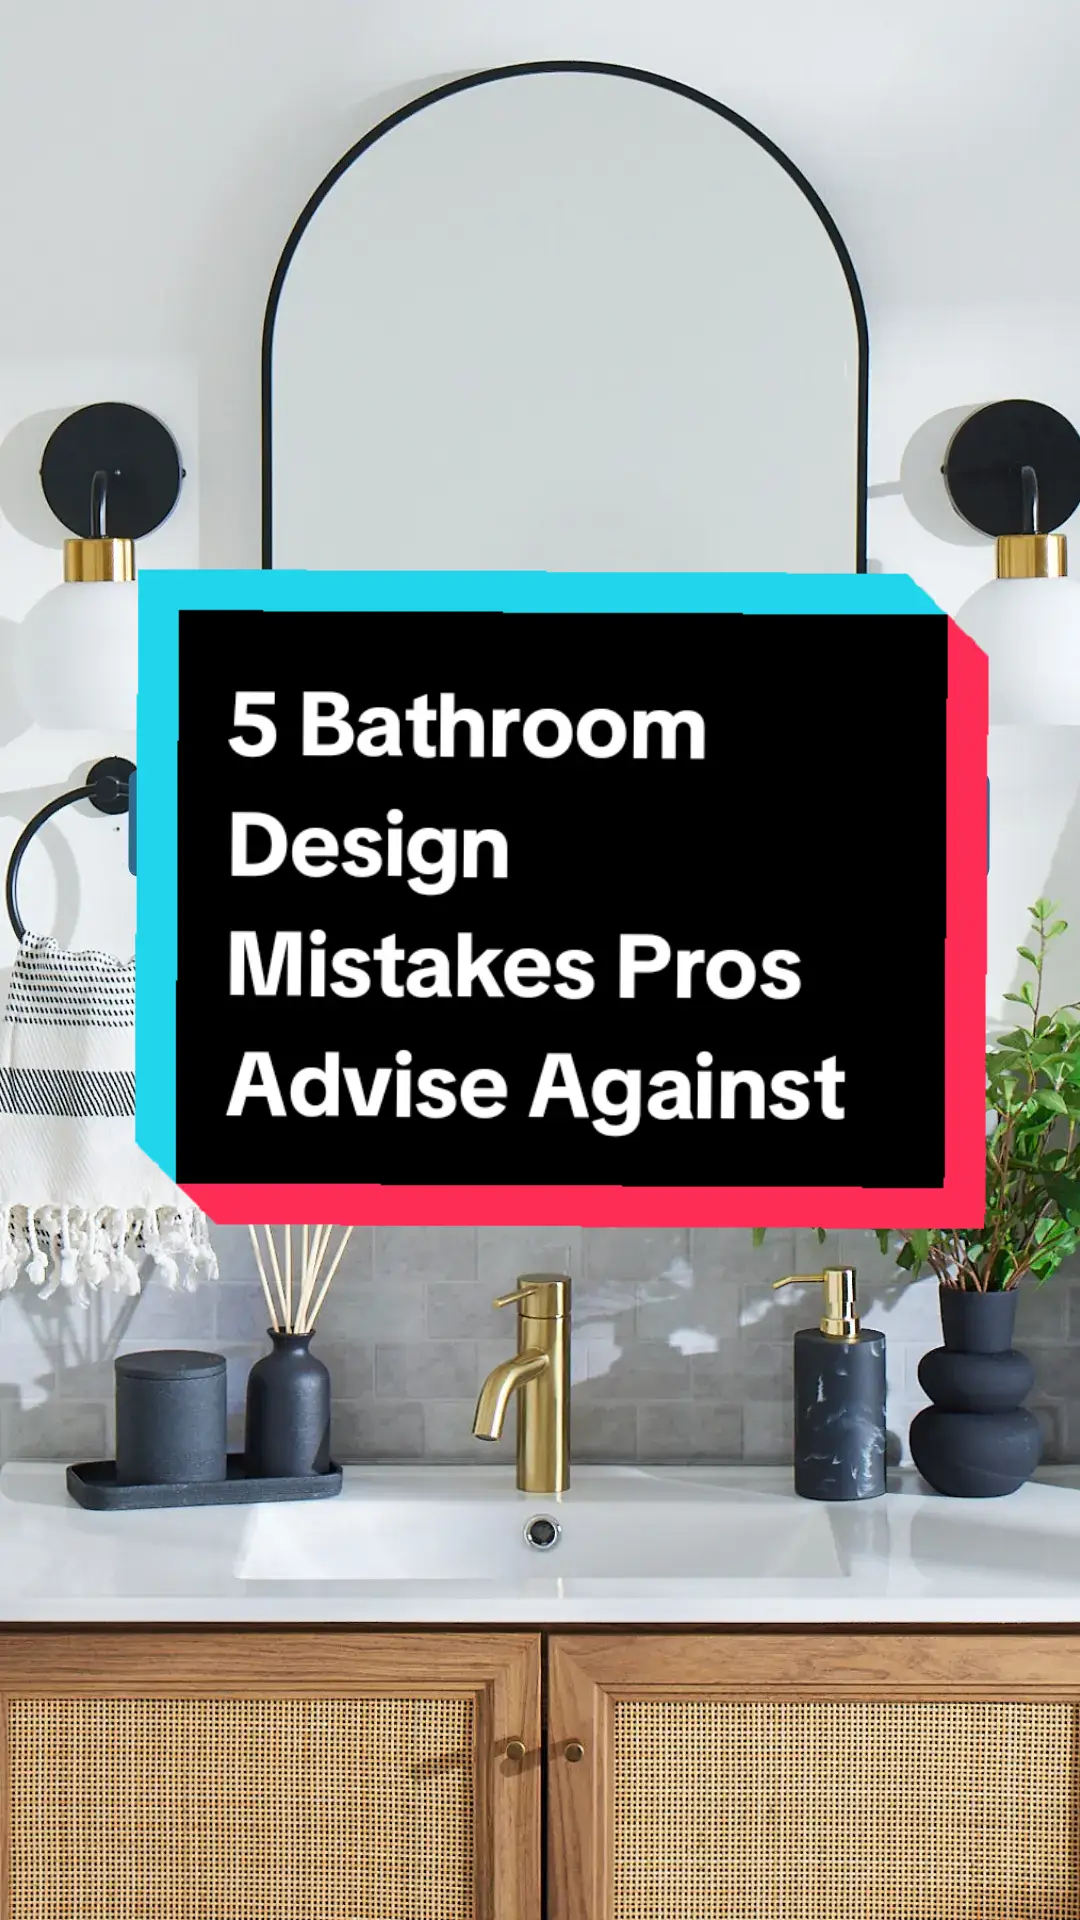 Bathroom renovations are a fun way to spruce up your space, but here are the five mistakes experts say to avoid when designing your bathroom. ✨️ Ultimately, as long as you love it, that’s what matters most! Click the link to learn more. #TheSpruce #bathroomremodel #bathroomrenovation #expertadvice #mistakeshappen Image credits: The Spruce originals